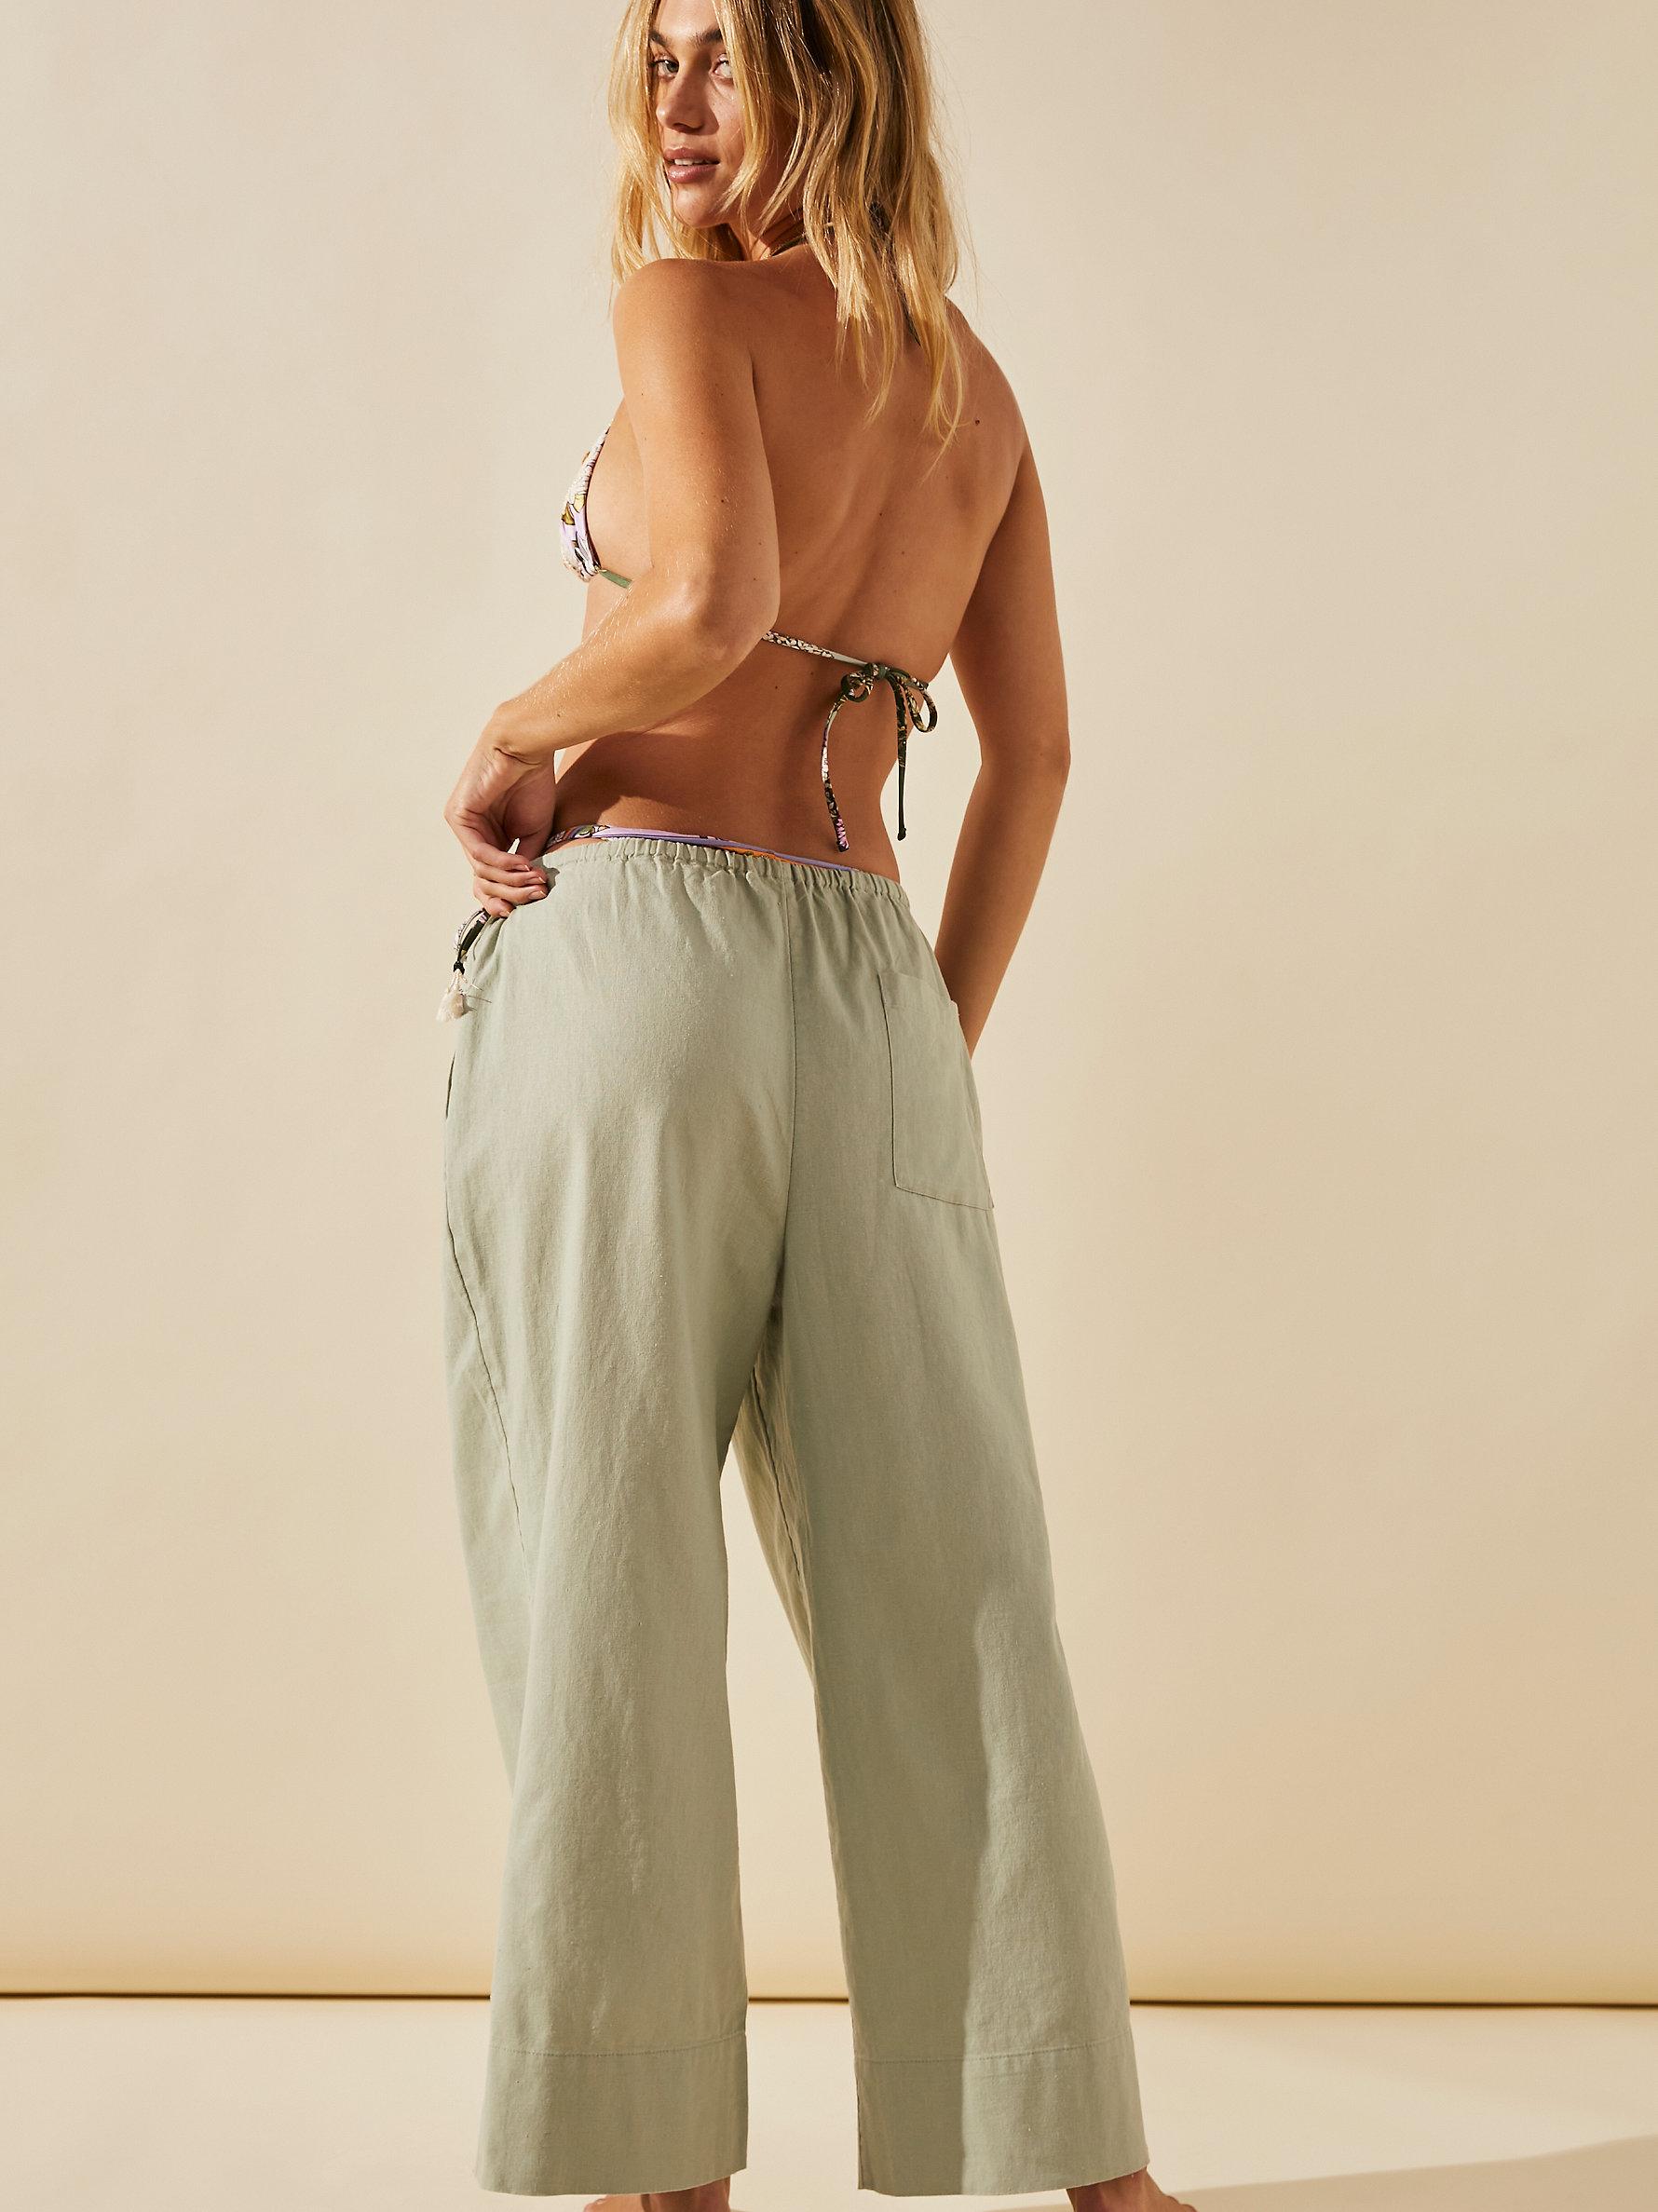 Free People Livin' In It Cotton-linen Pants in Natural